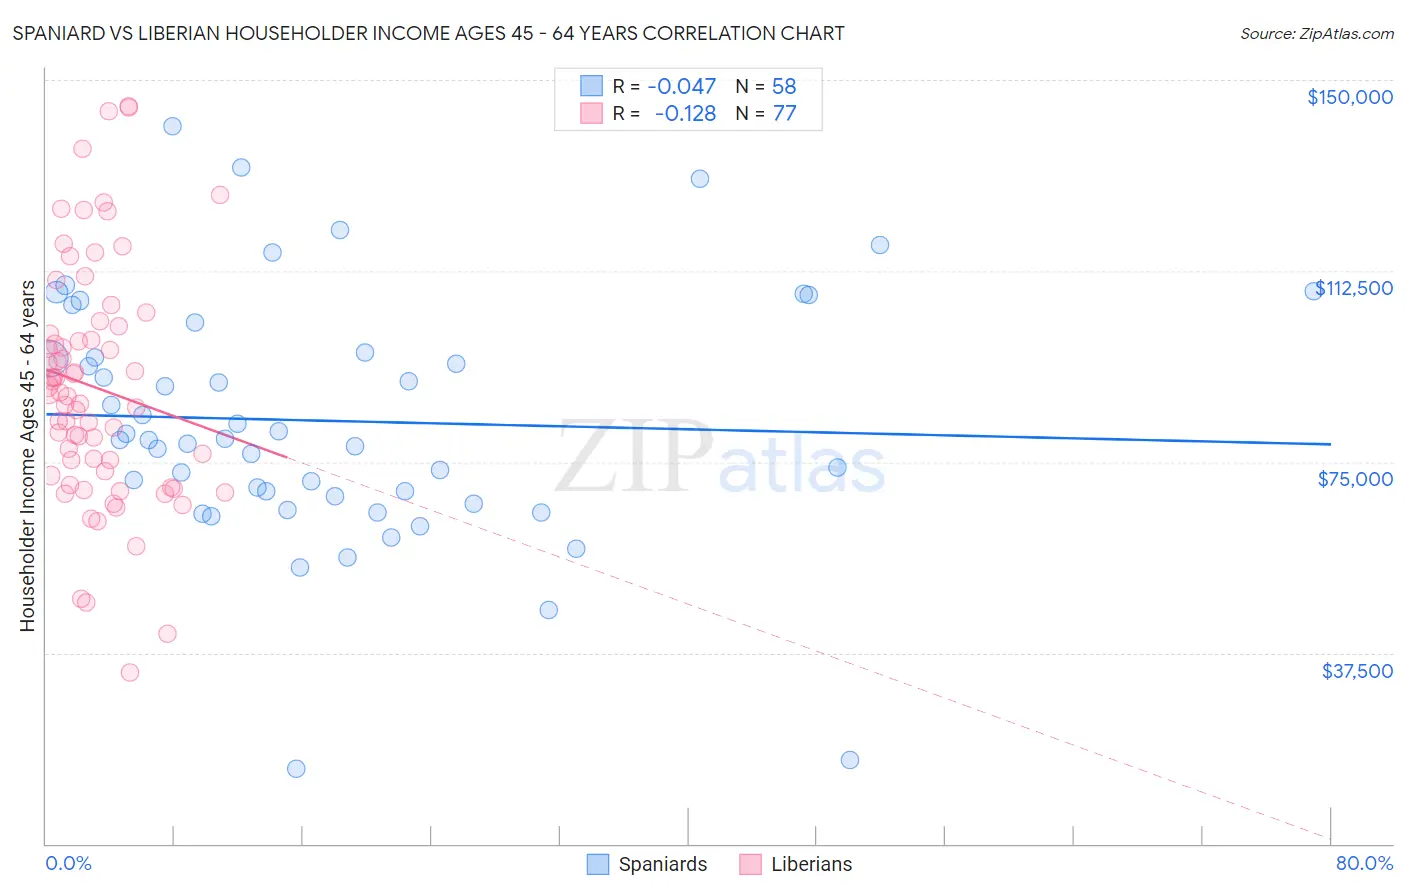 Spaniard vs Liberian Householder Income Ages 45 - 64 years